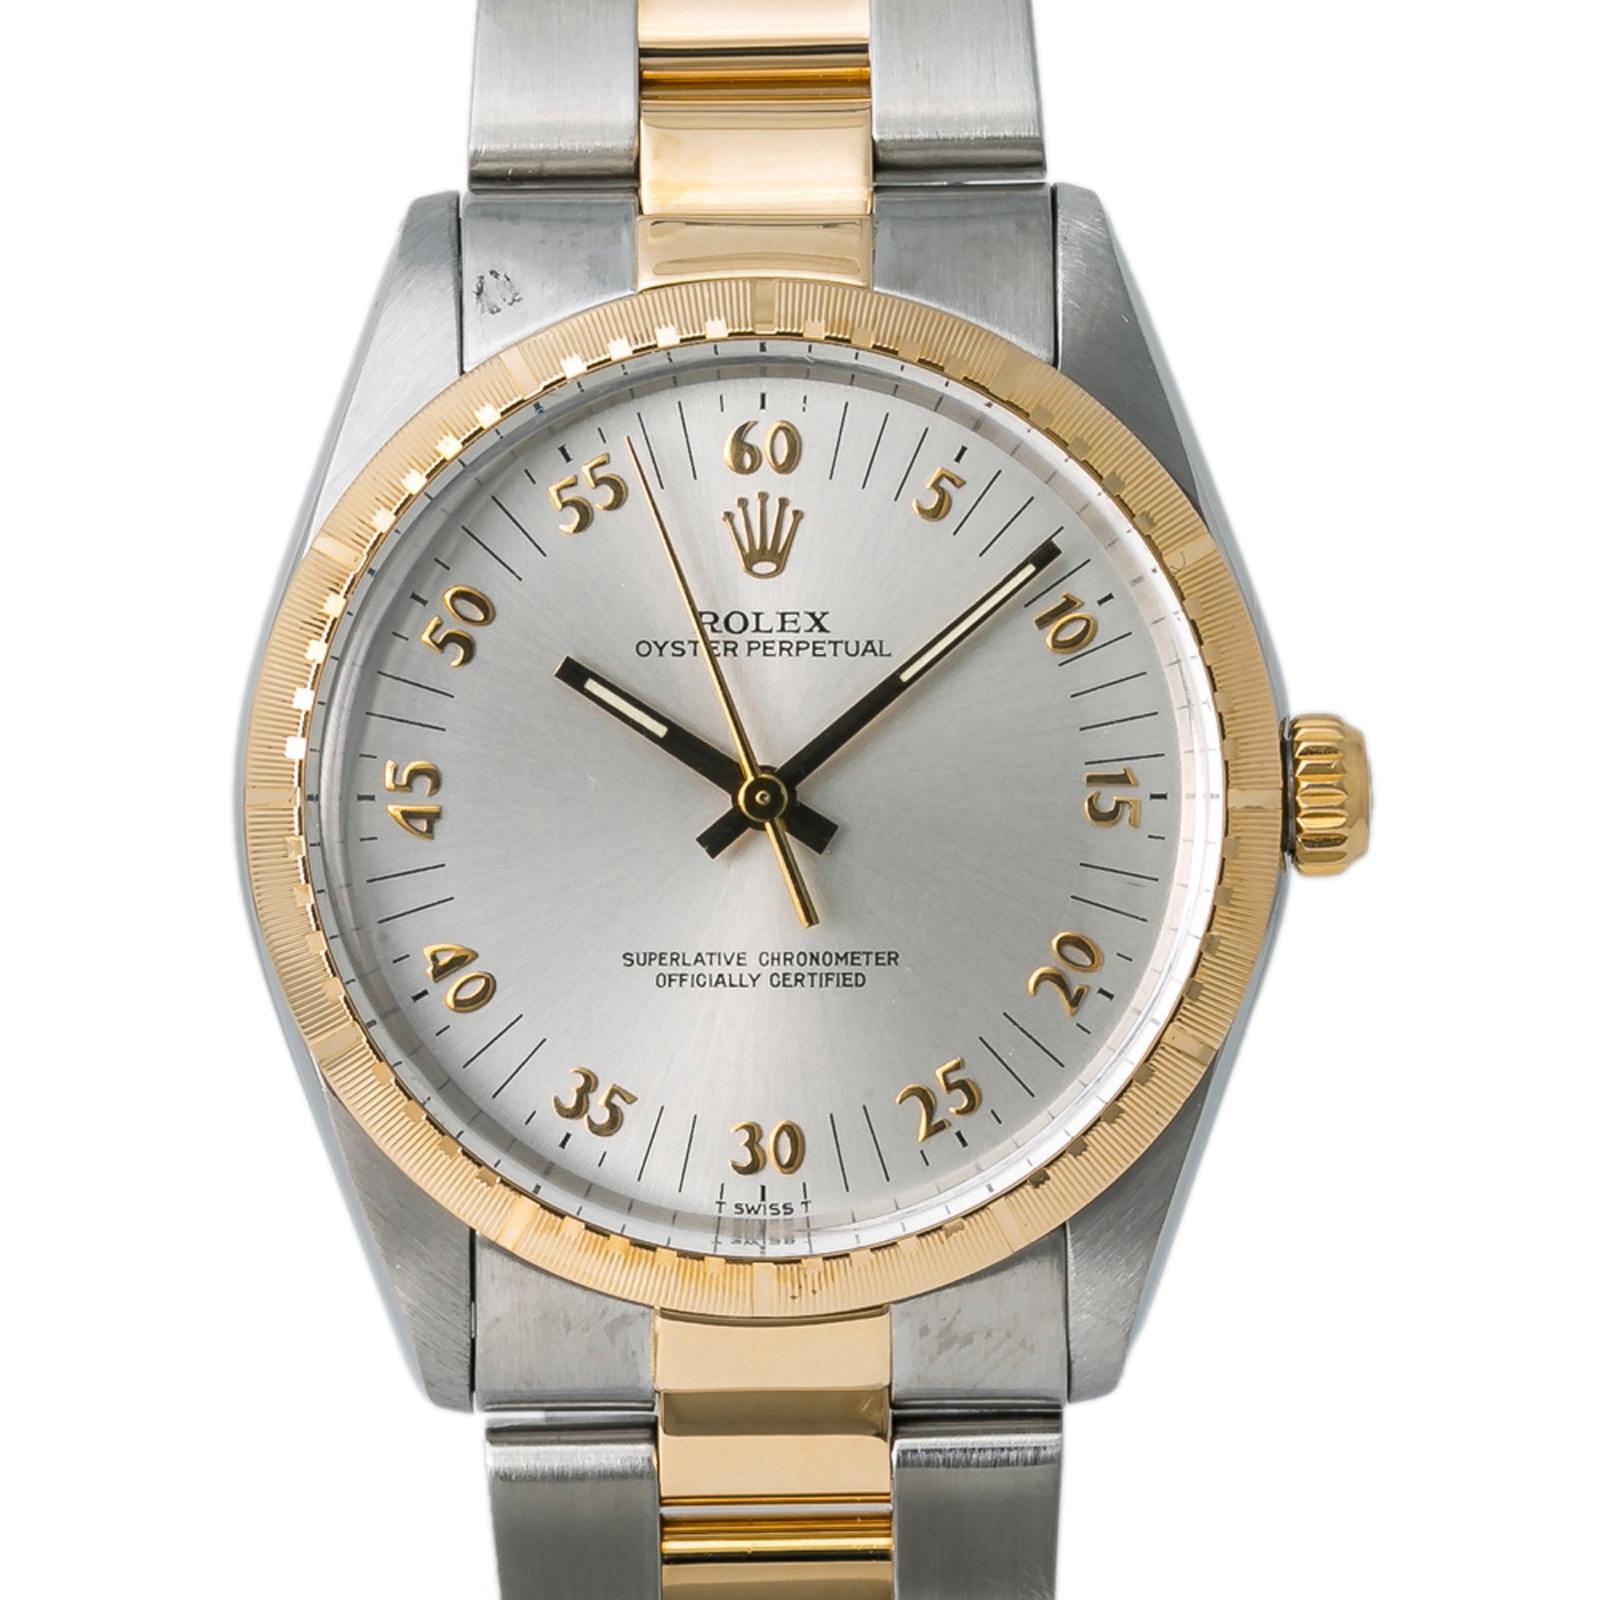 Rolex Oyster Perpetual 1038 Automatic Unisex Watch Two-Tone 18k YG 34mm